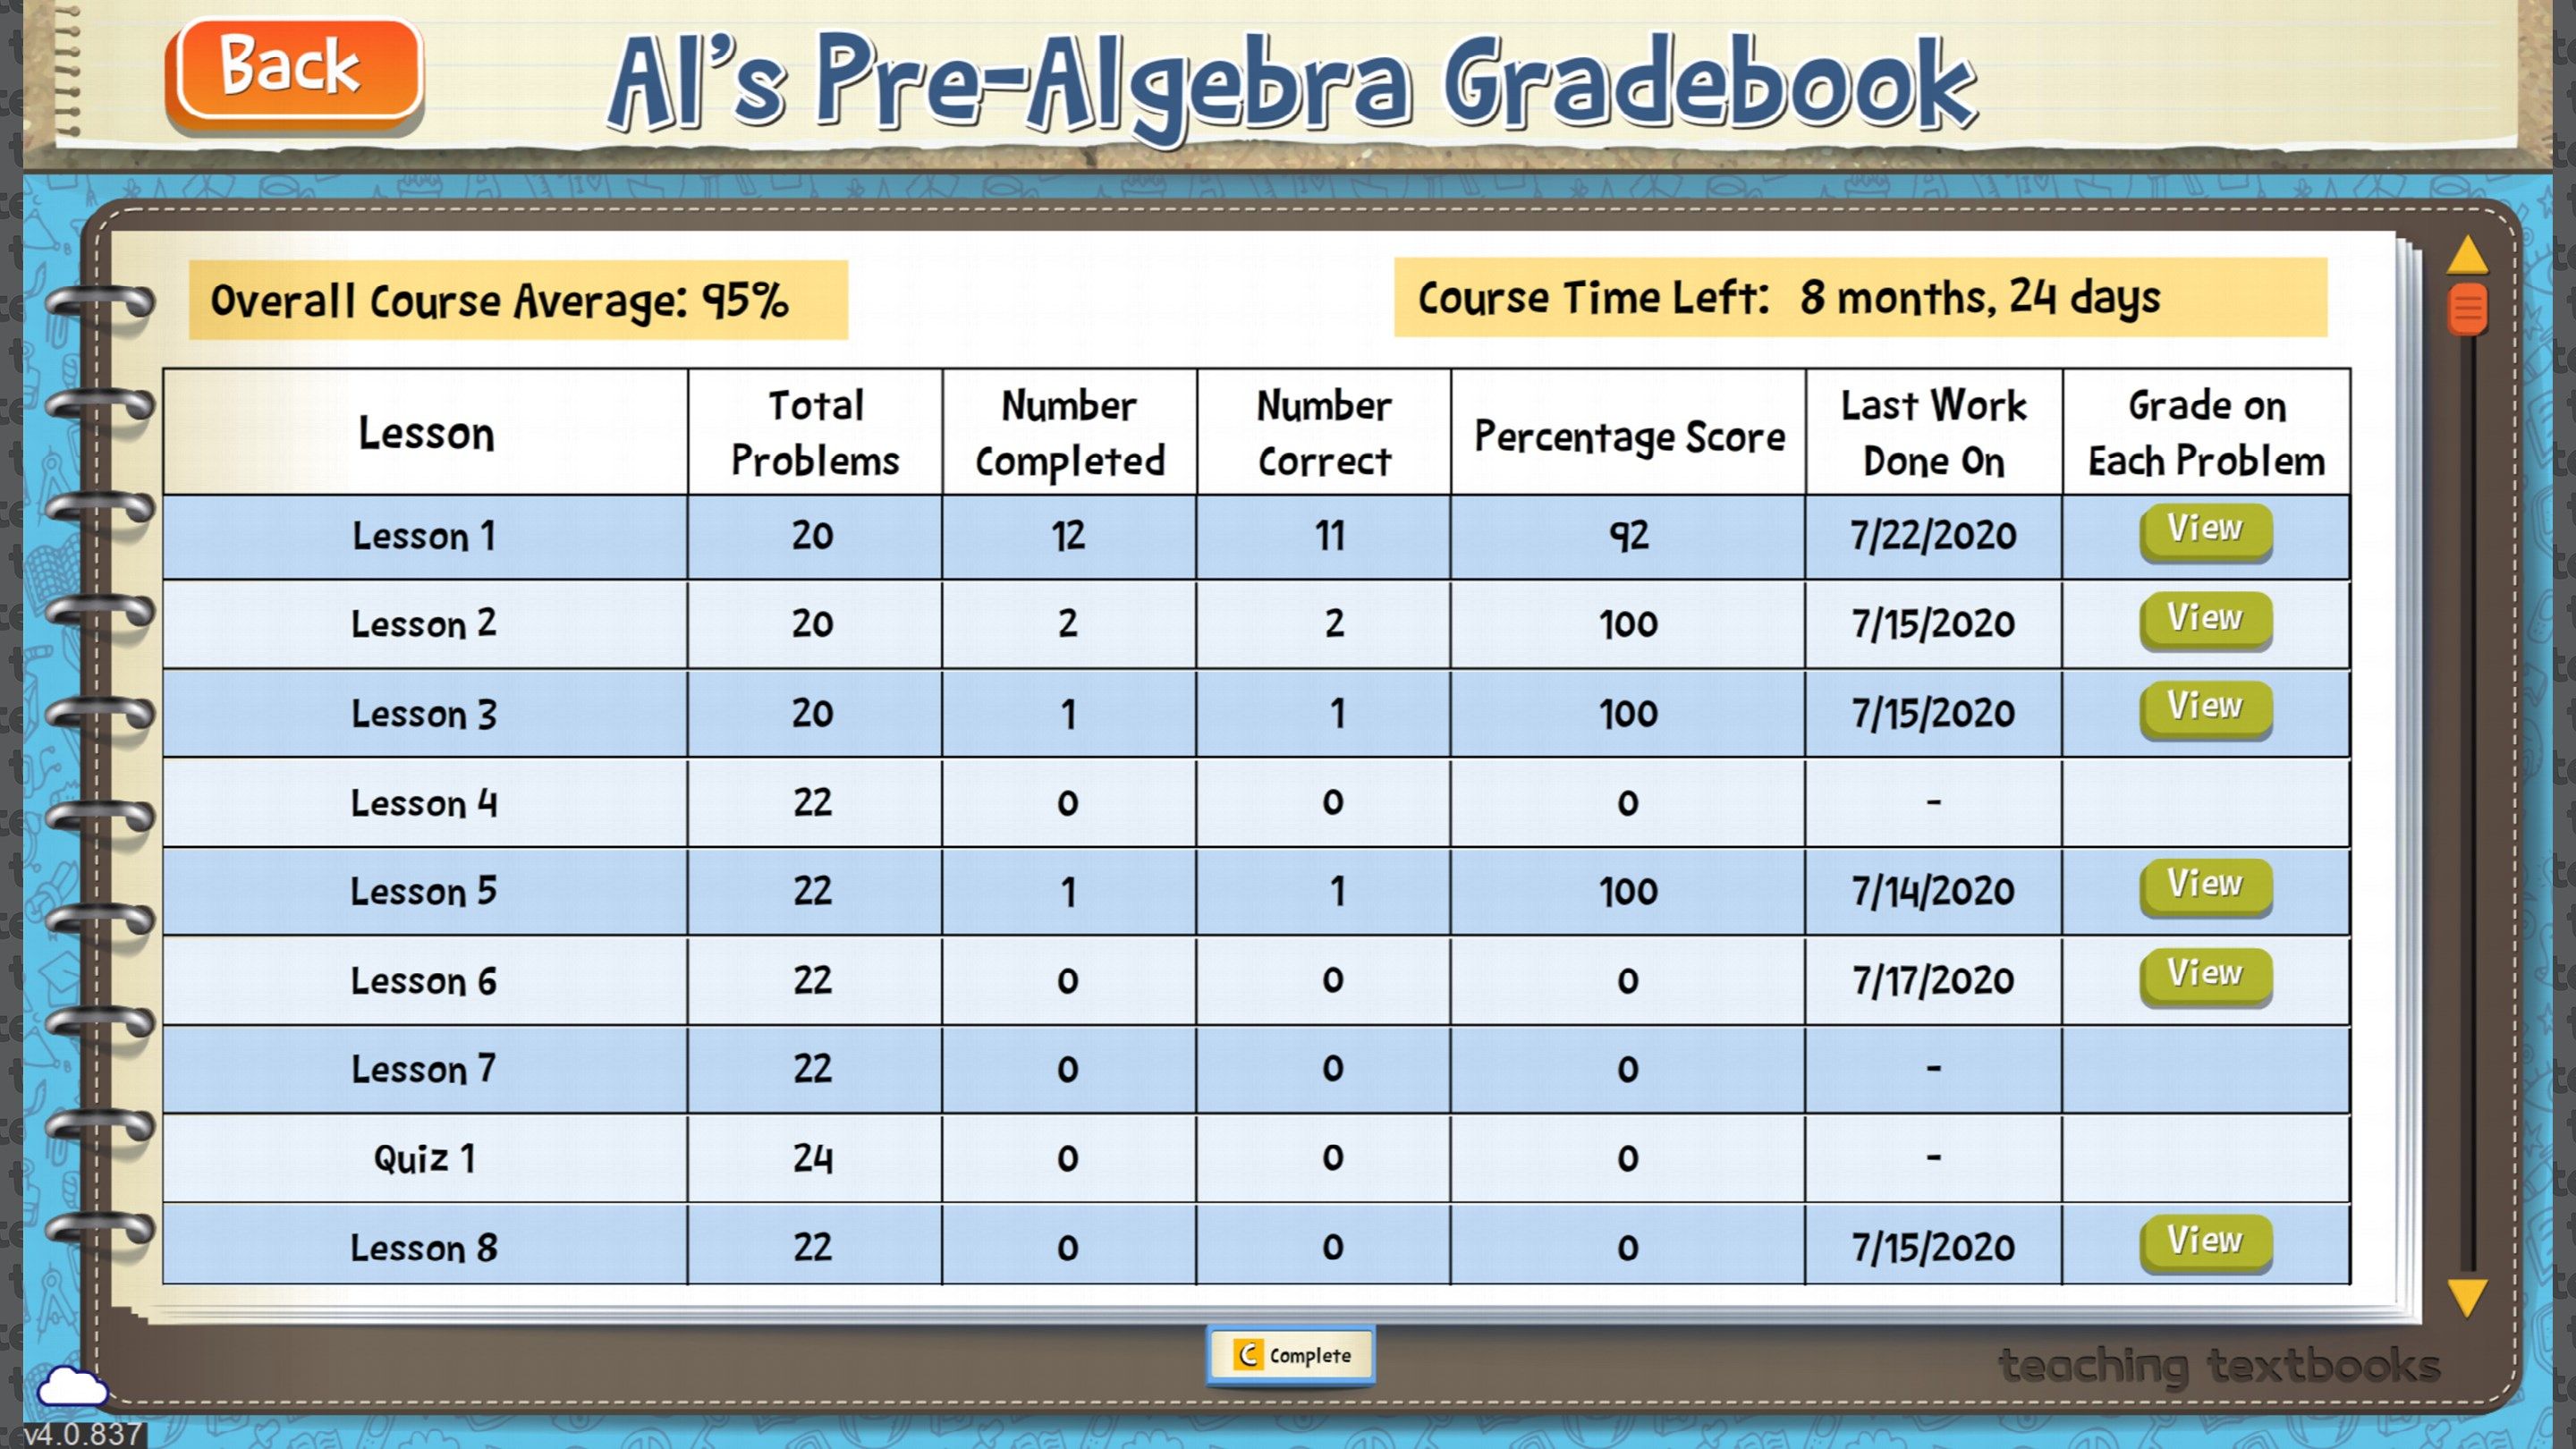 The Gradebook shows the details of the student's progress through the course. As the parent, you can edit the Gradebook, or print it for your records.